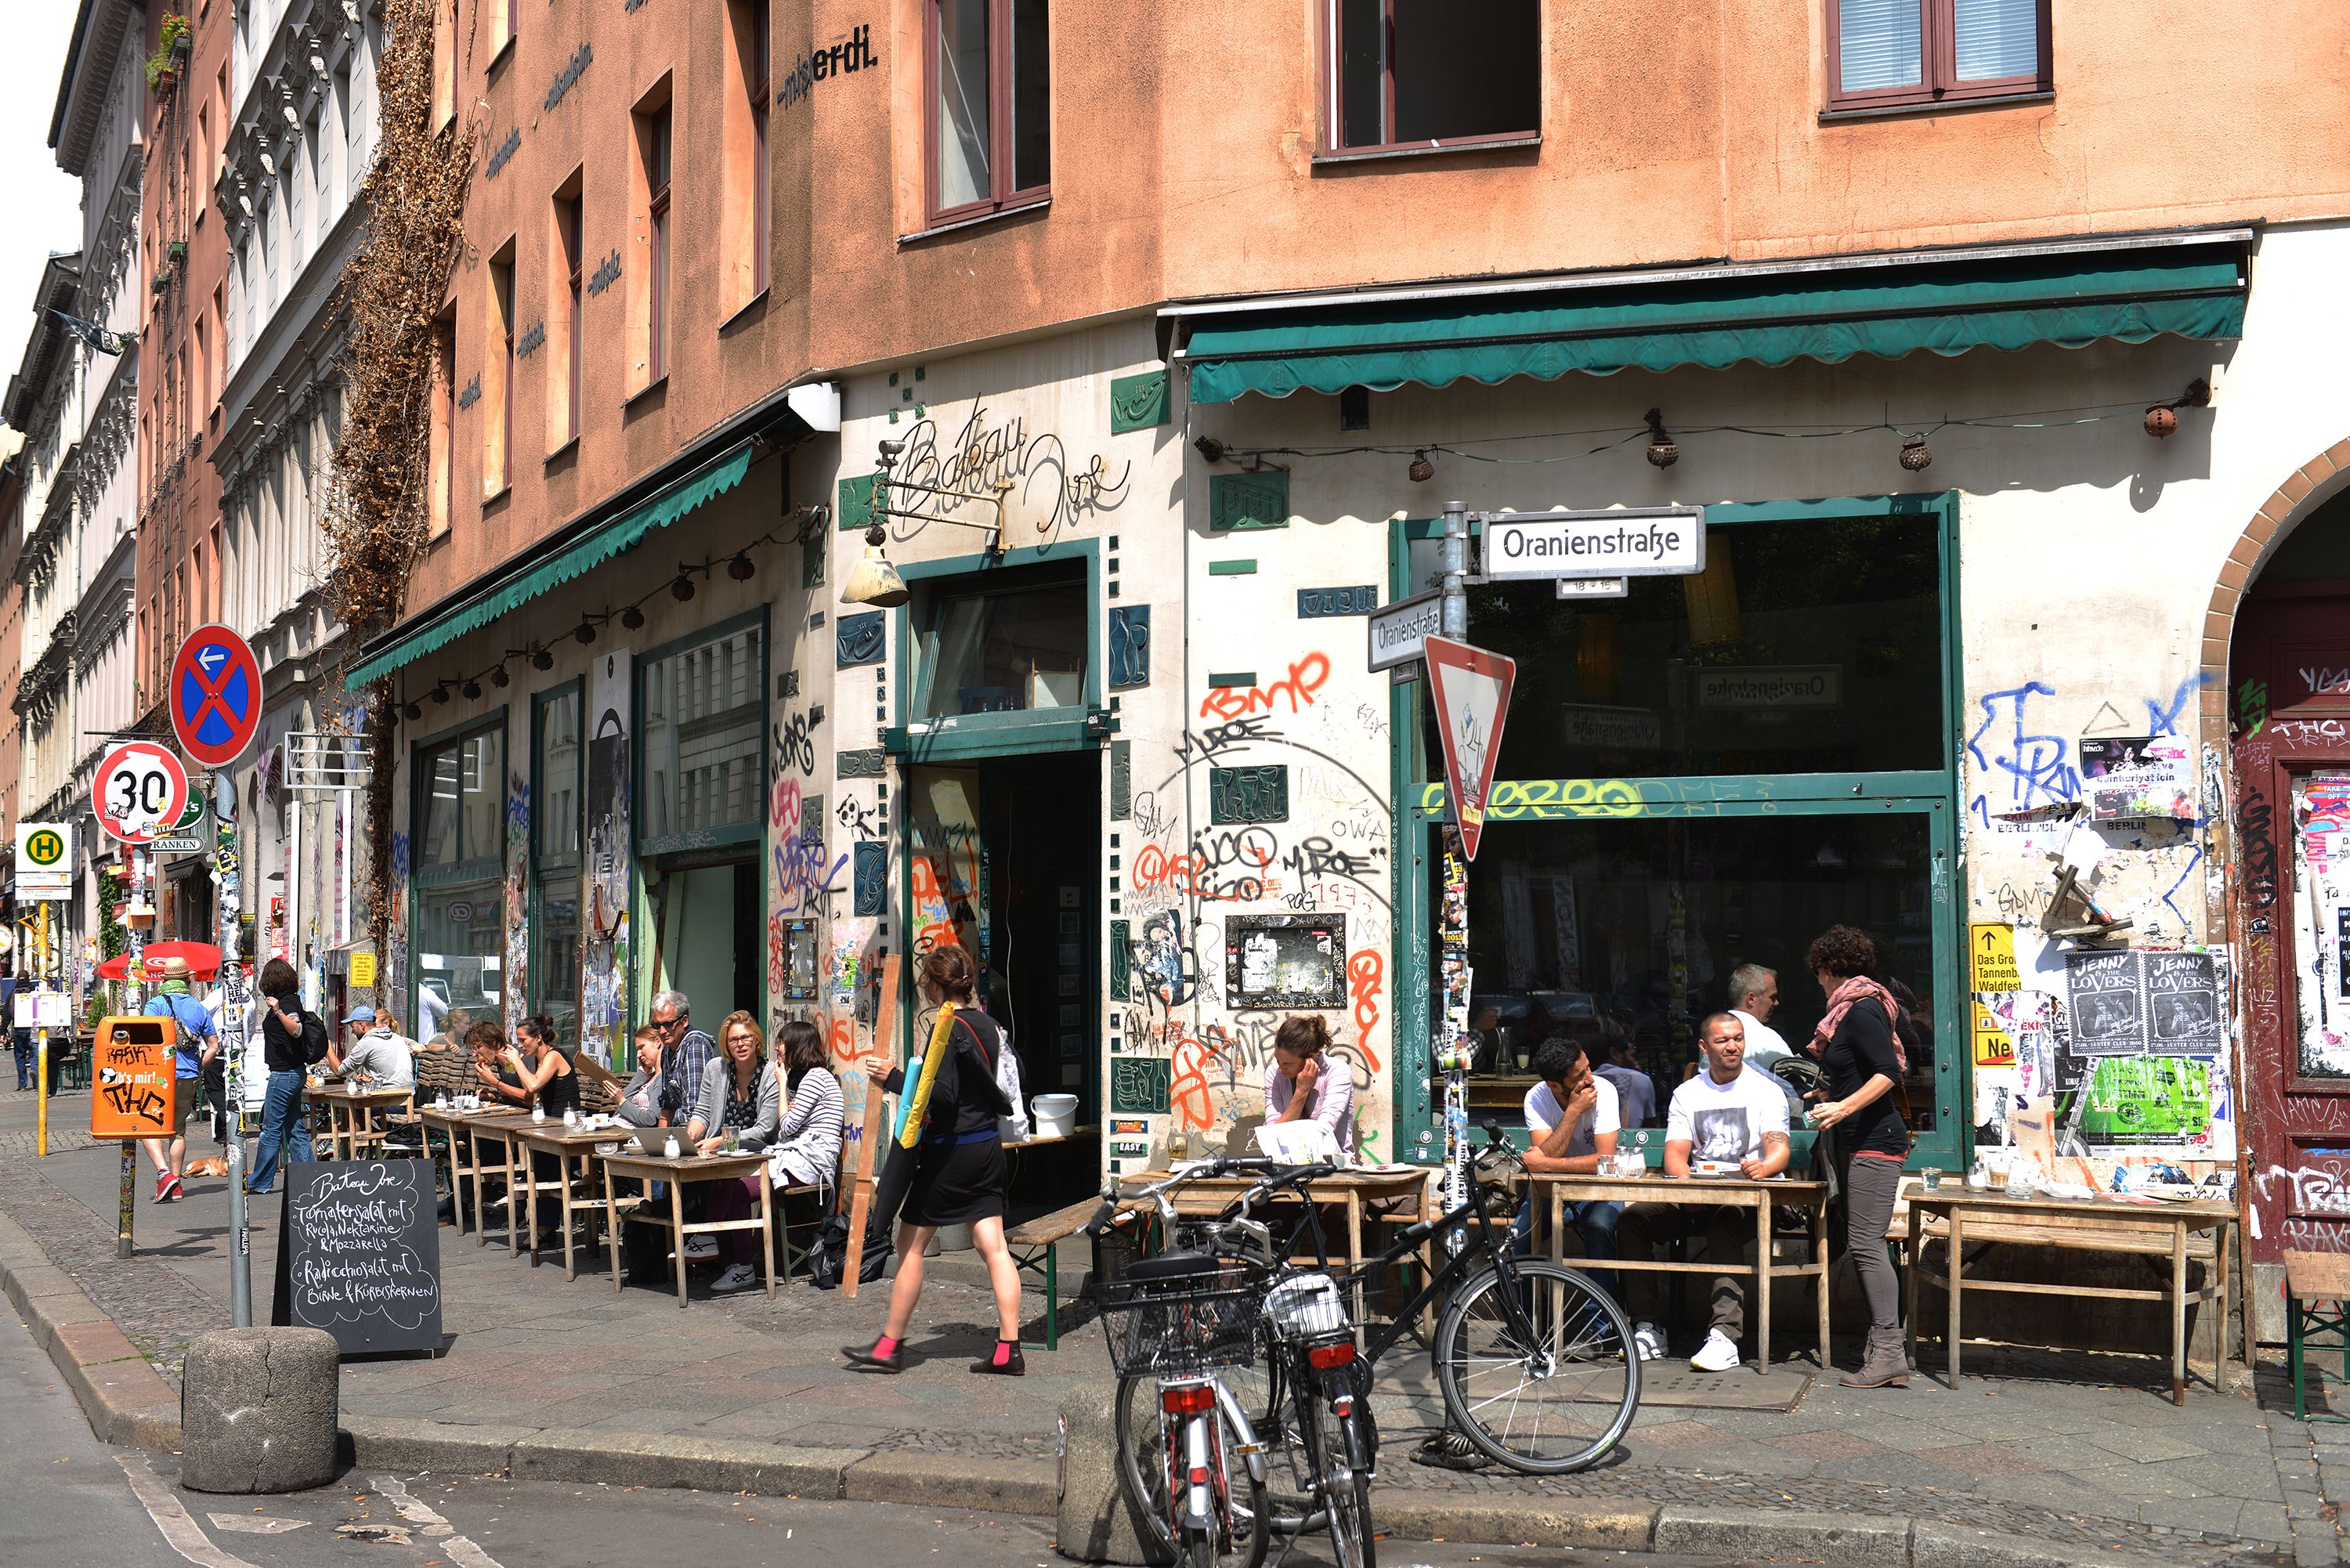 <strong>Oranienstrasse, Berlin:</strong> This street in the fashionable Kreuzberg neighborhood is well known for its Turkish restaurants. It's ranked at no. 8. 